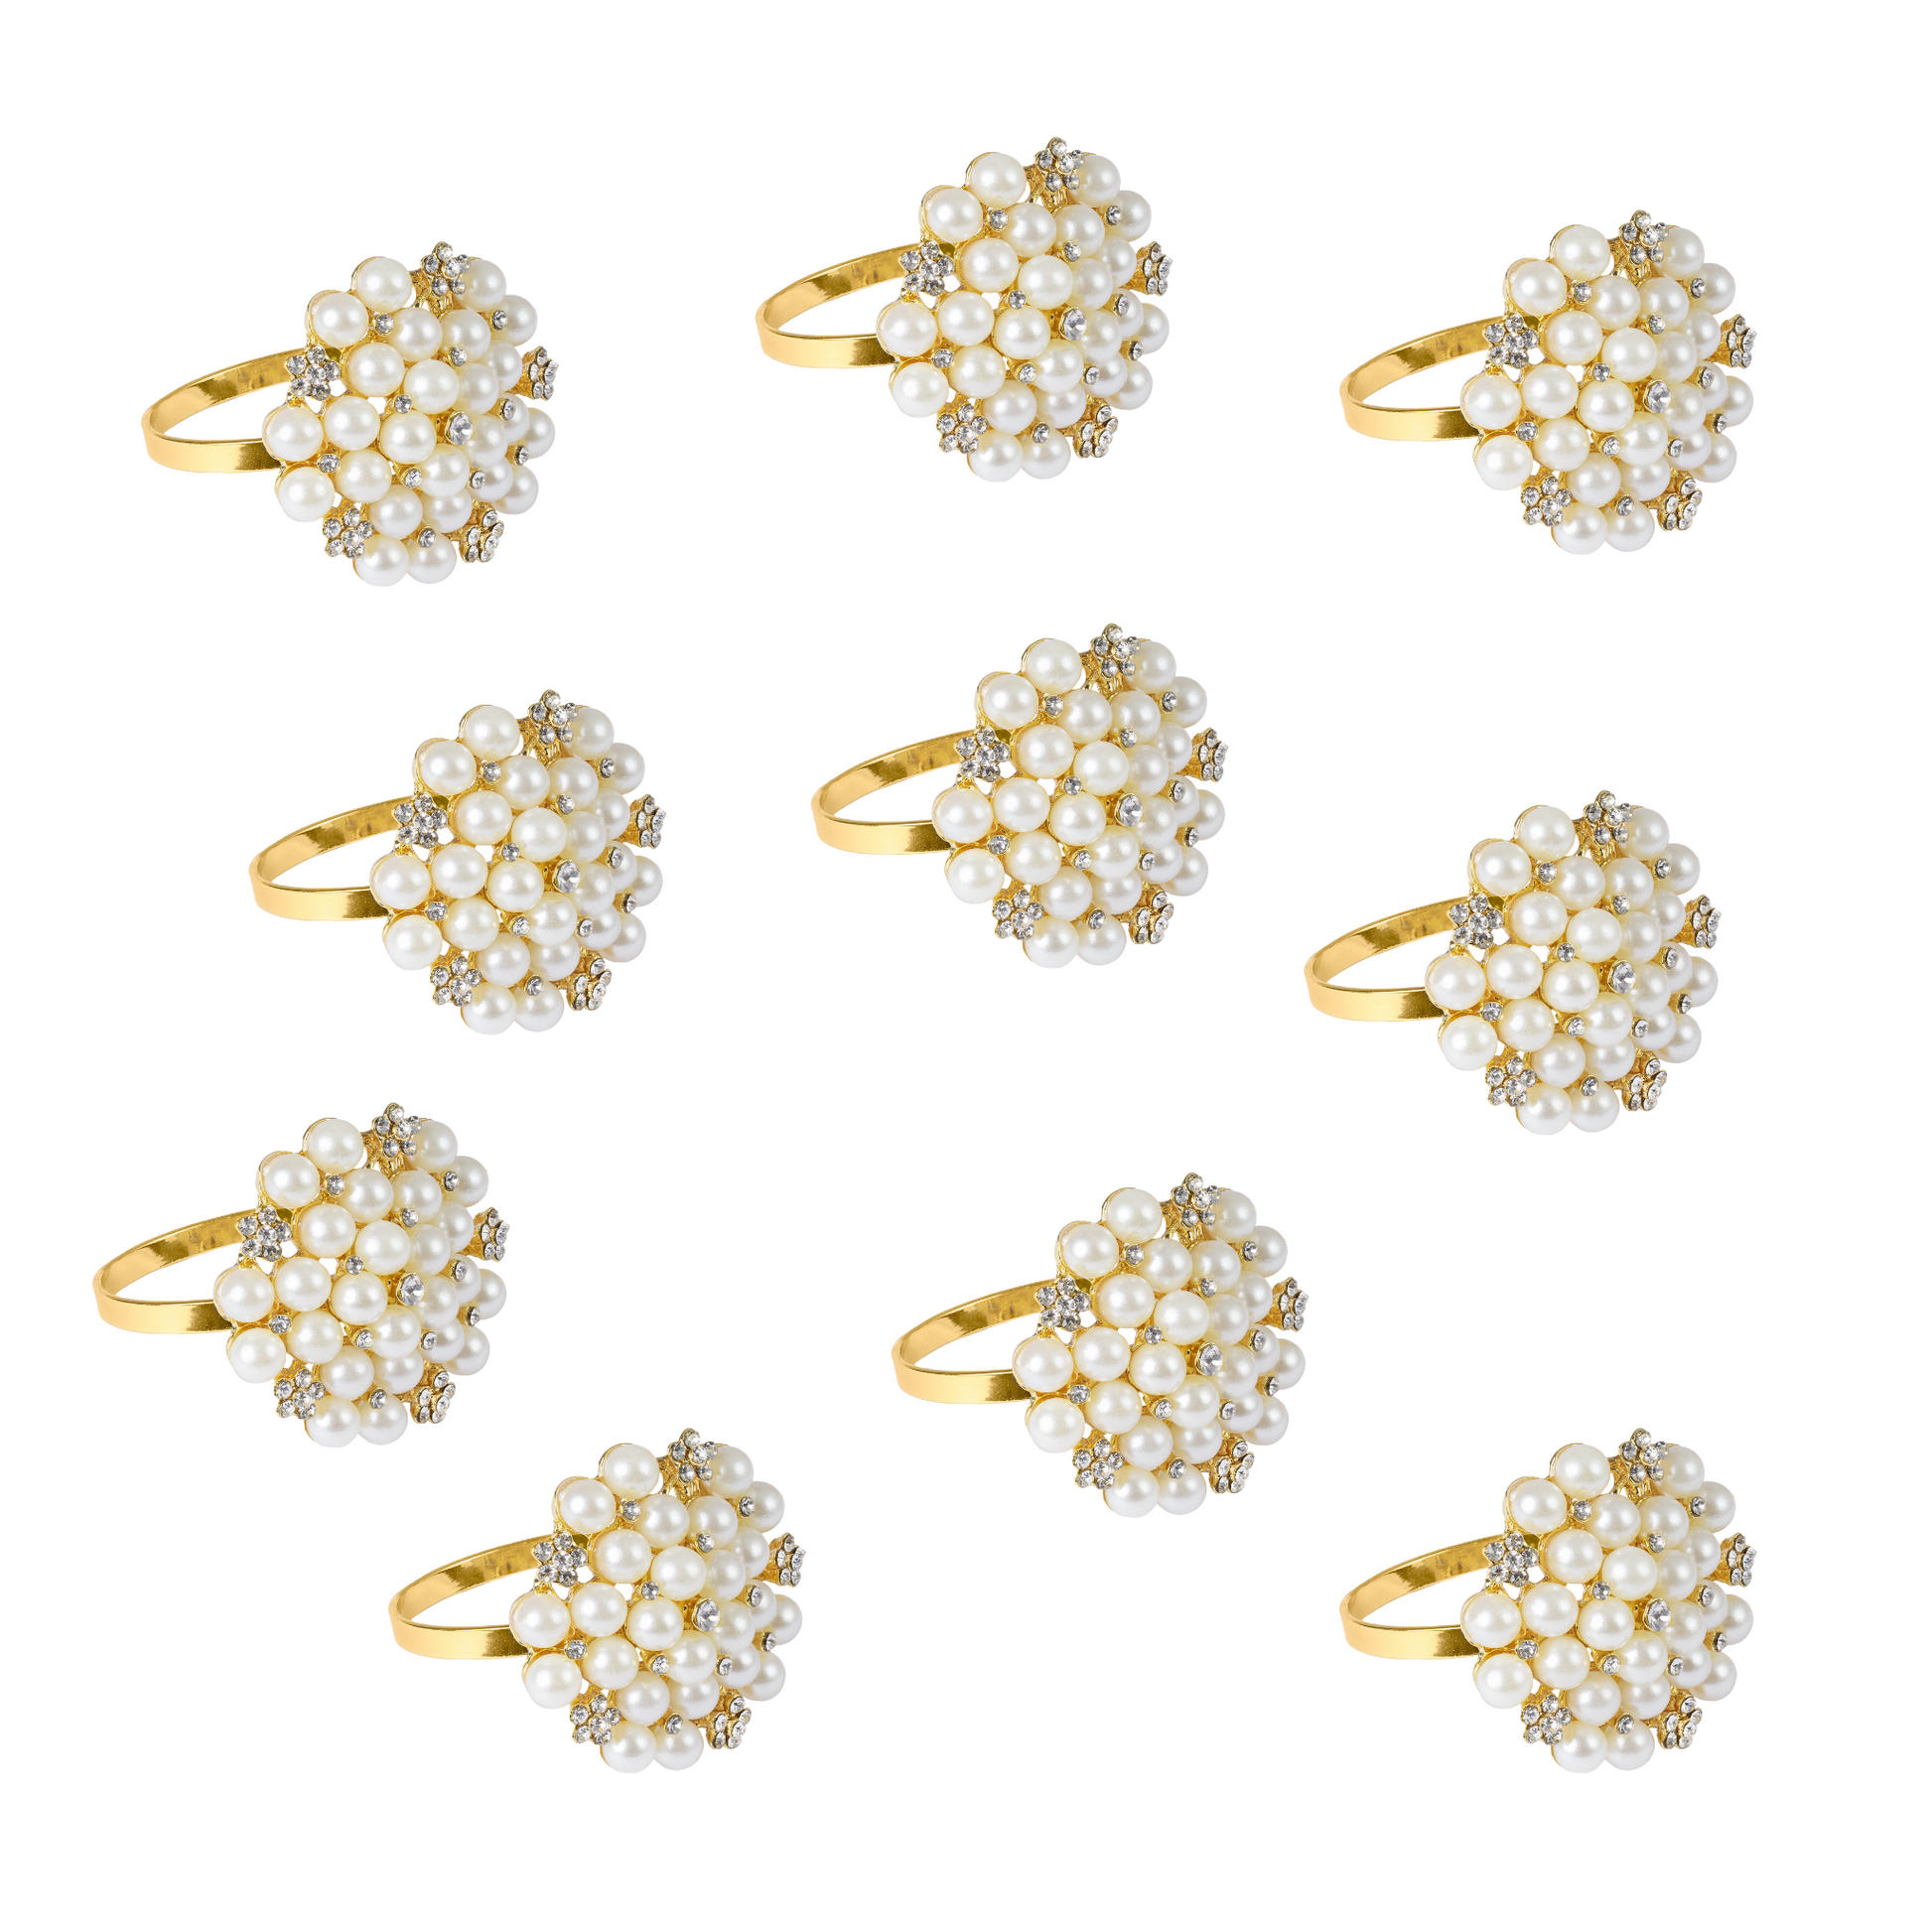 10 pc/pk Pearl and Diamond Cluster Napkin Ring - Gold